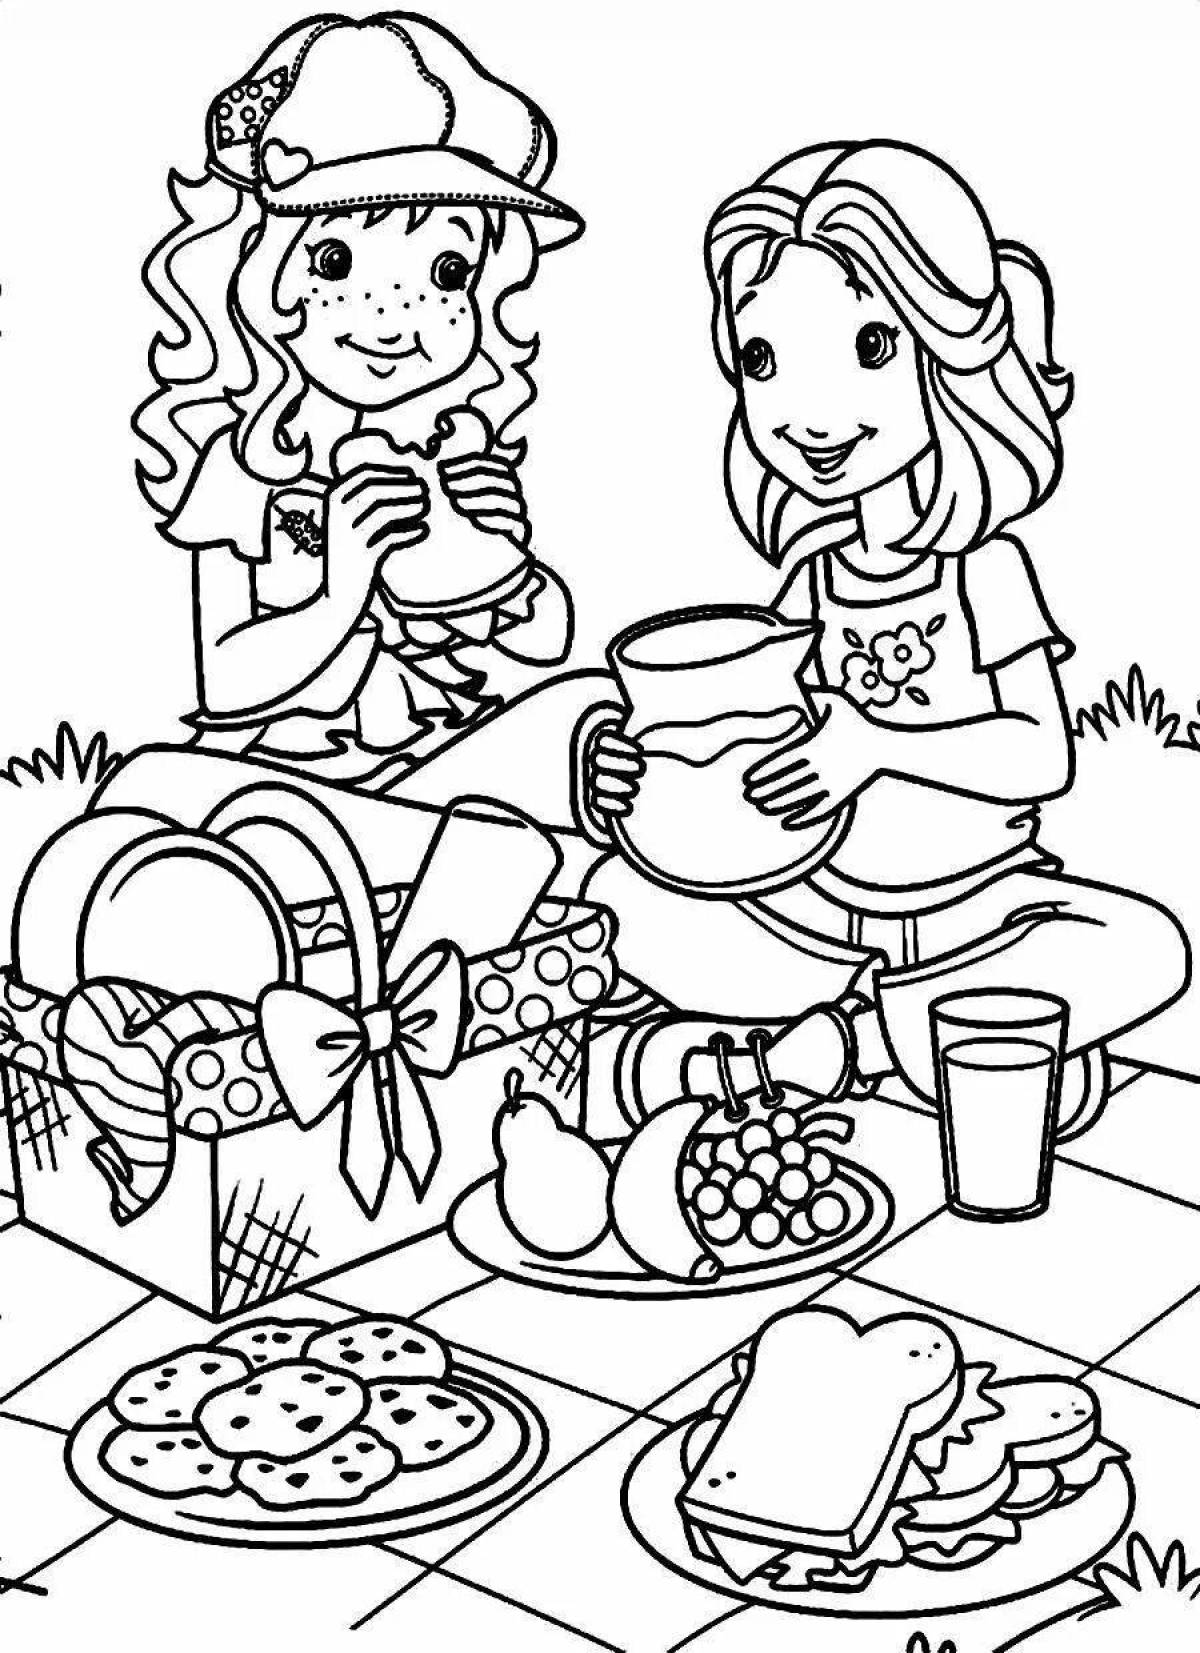 Pretty drink coloring book for girls